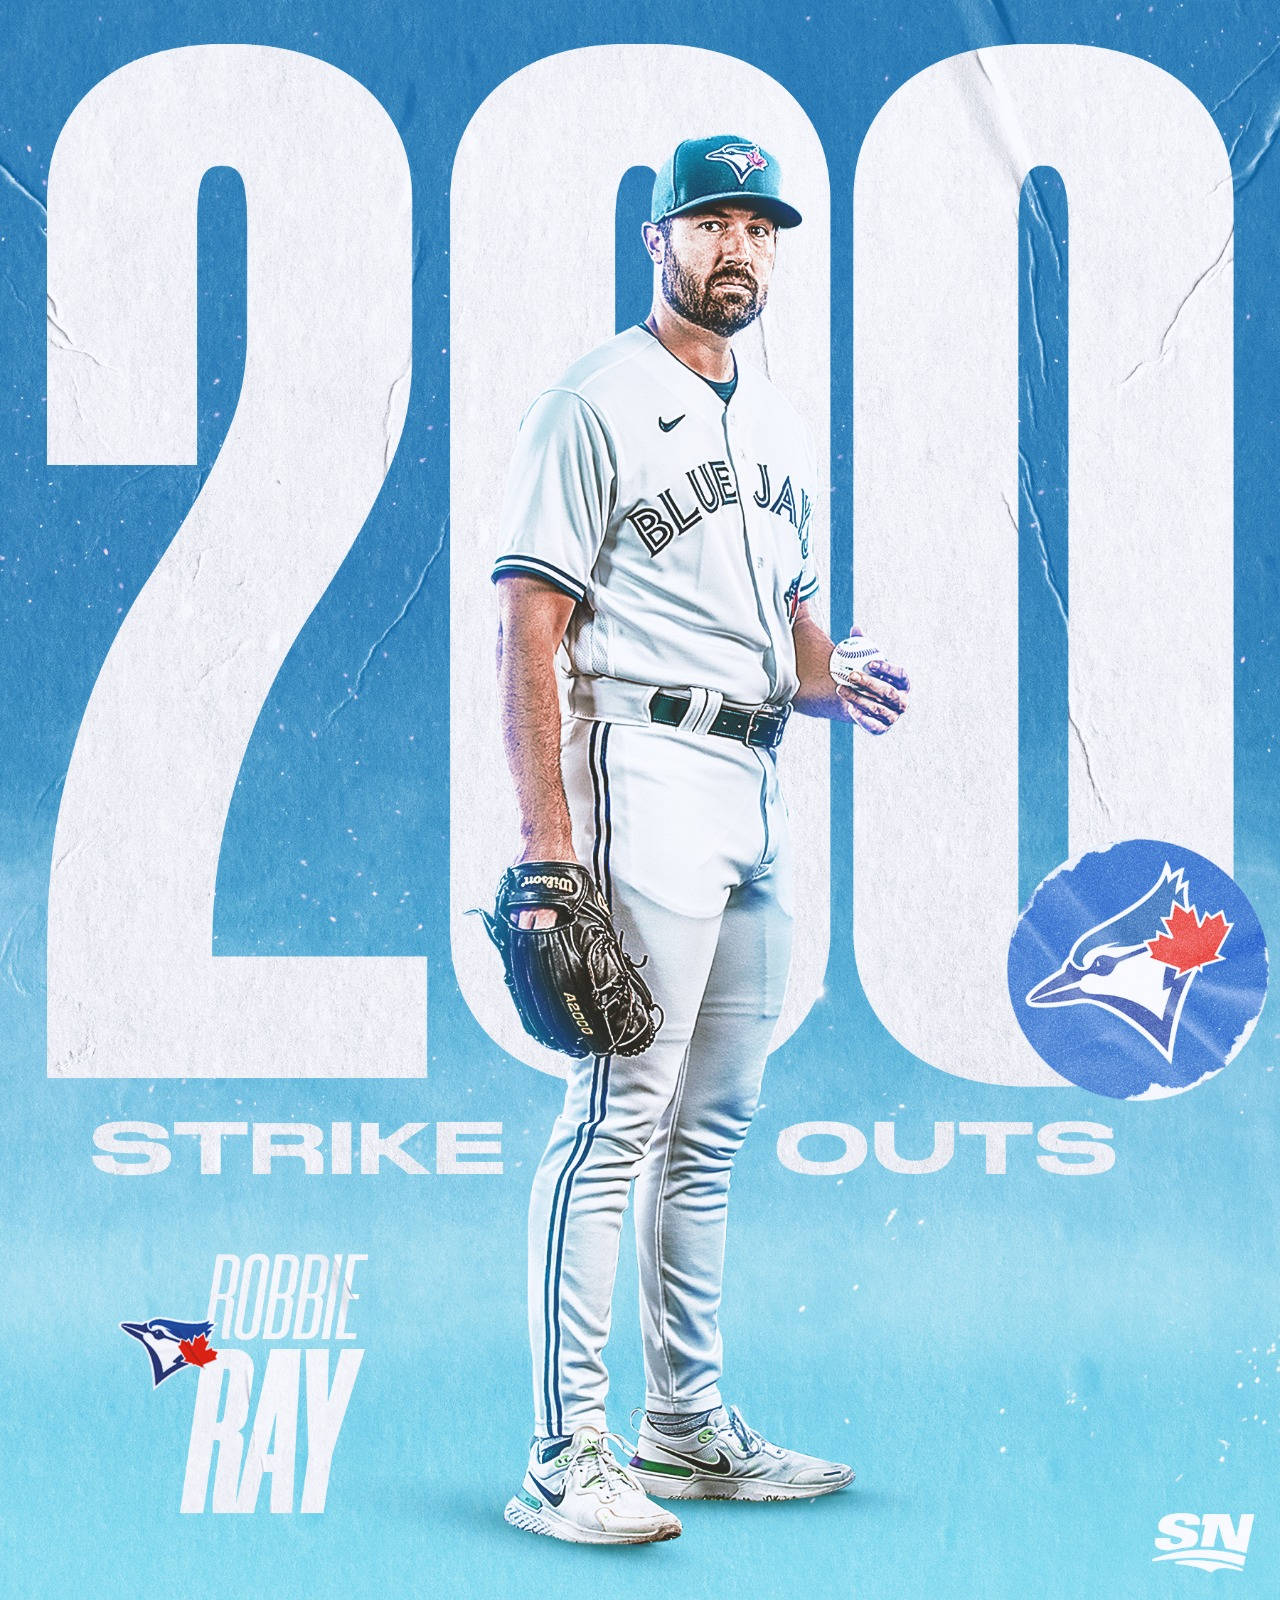 Robbie Ray 200 Strikeouts Poster Wallpaper